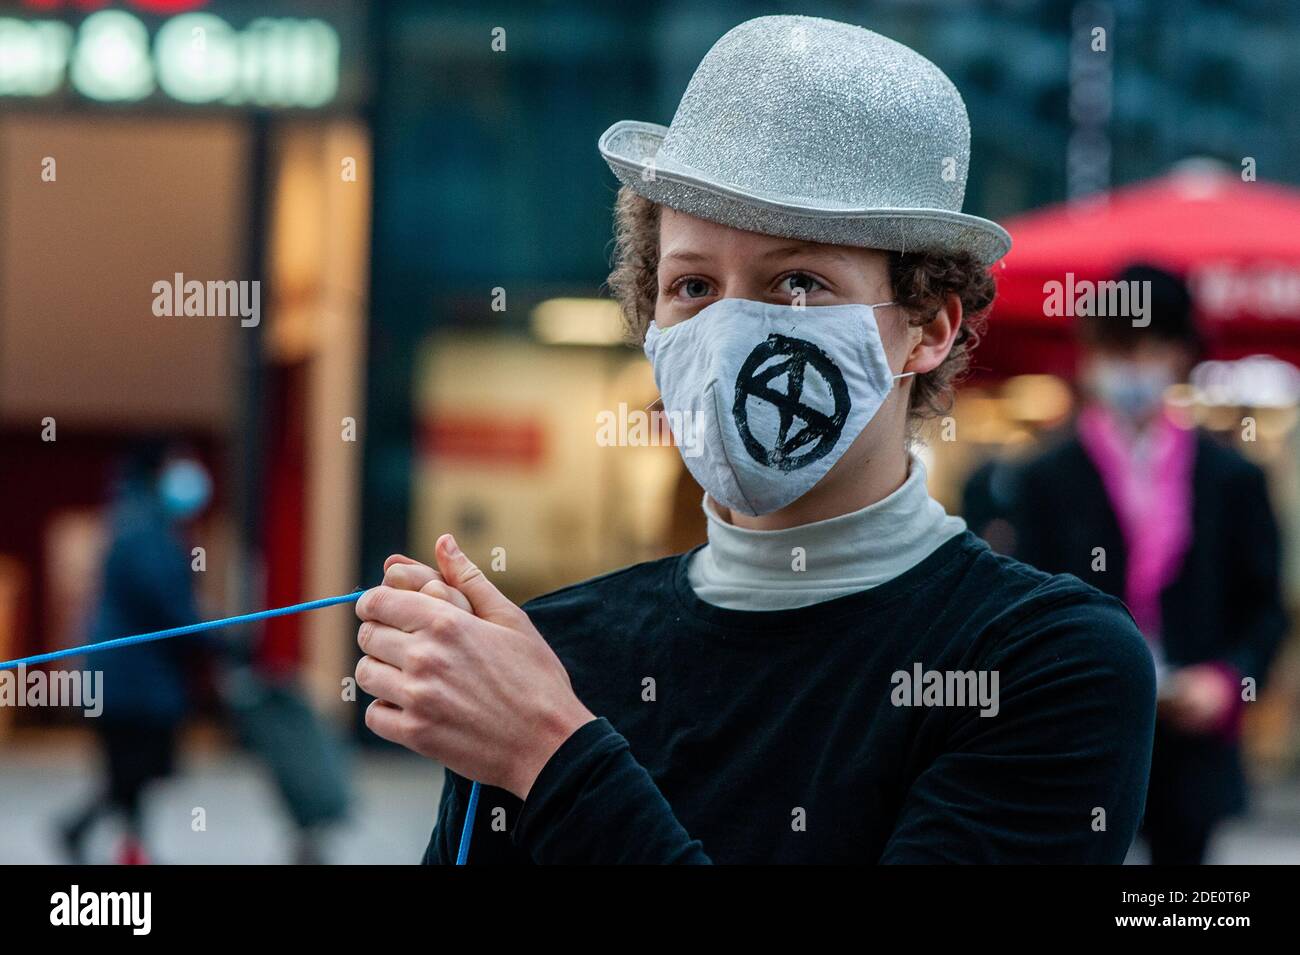 A climate activist is seen wearing a face mask with the XR logo on it during the demonstration.In many cities around The Netherlands, the climate organization Extinction Rebellion has organized several actions against overconsumption during Black Friday, and to put an end to this day. In Utrecht, the climate activists organized a bizarre circus protest with acrobats and capitalism clowns, to show how they see the 'circus' around Black Friday. The action took place in front of the Hoog Catharijne shopping mall which is one of the largest indoor shopping centers in The Netherlands. Stock Photo